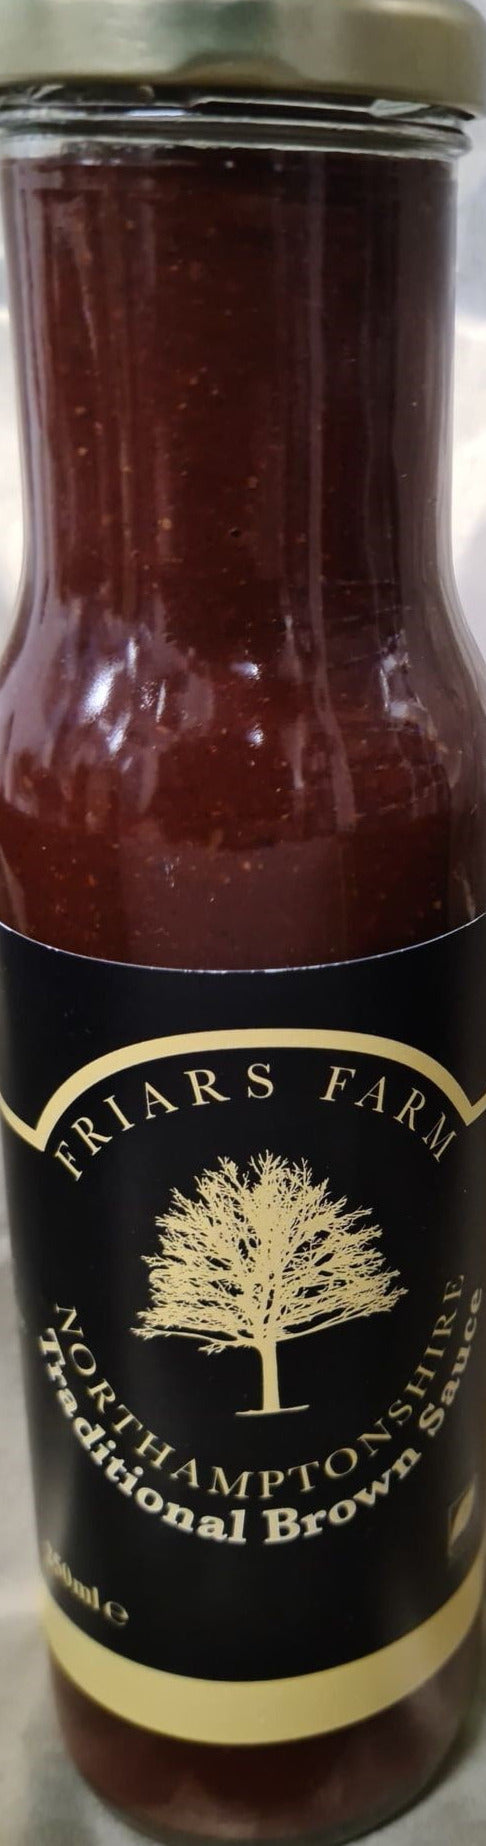 Friars Farm Traditional Brown Sauce